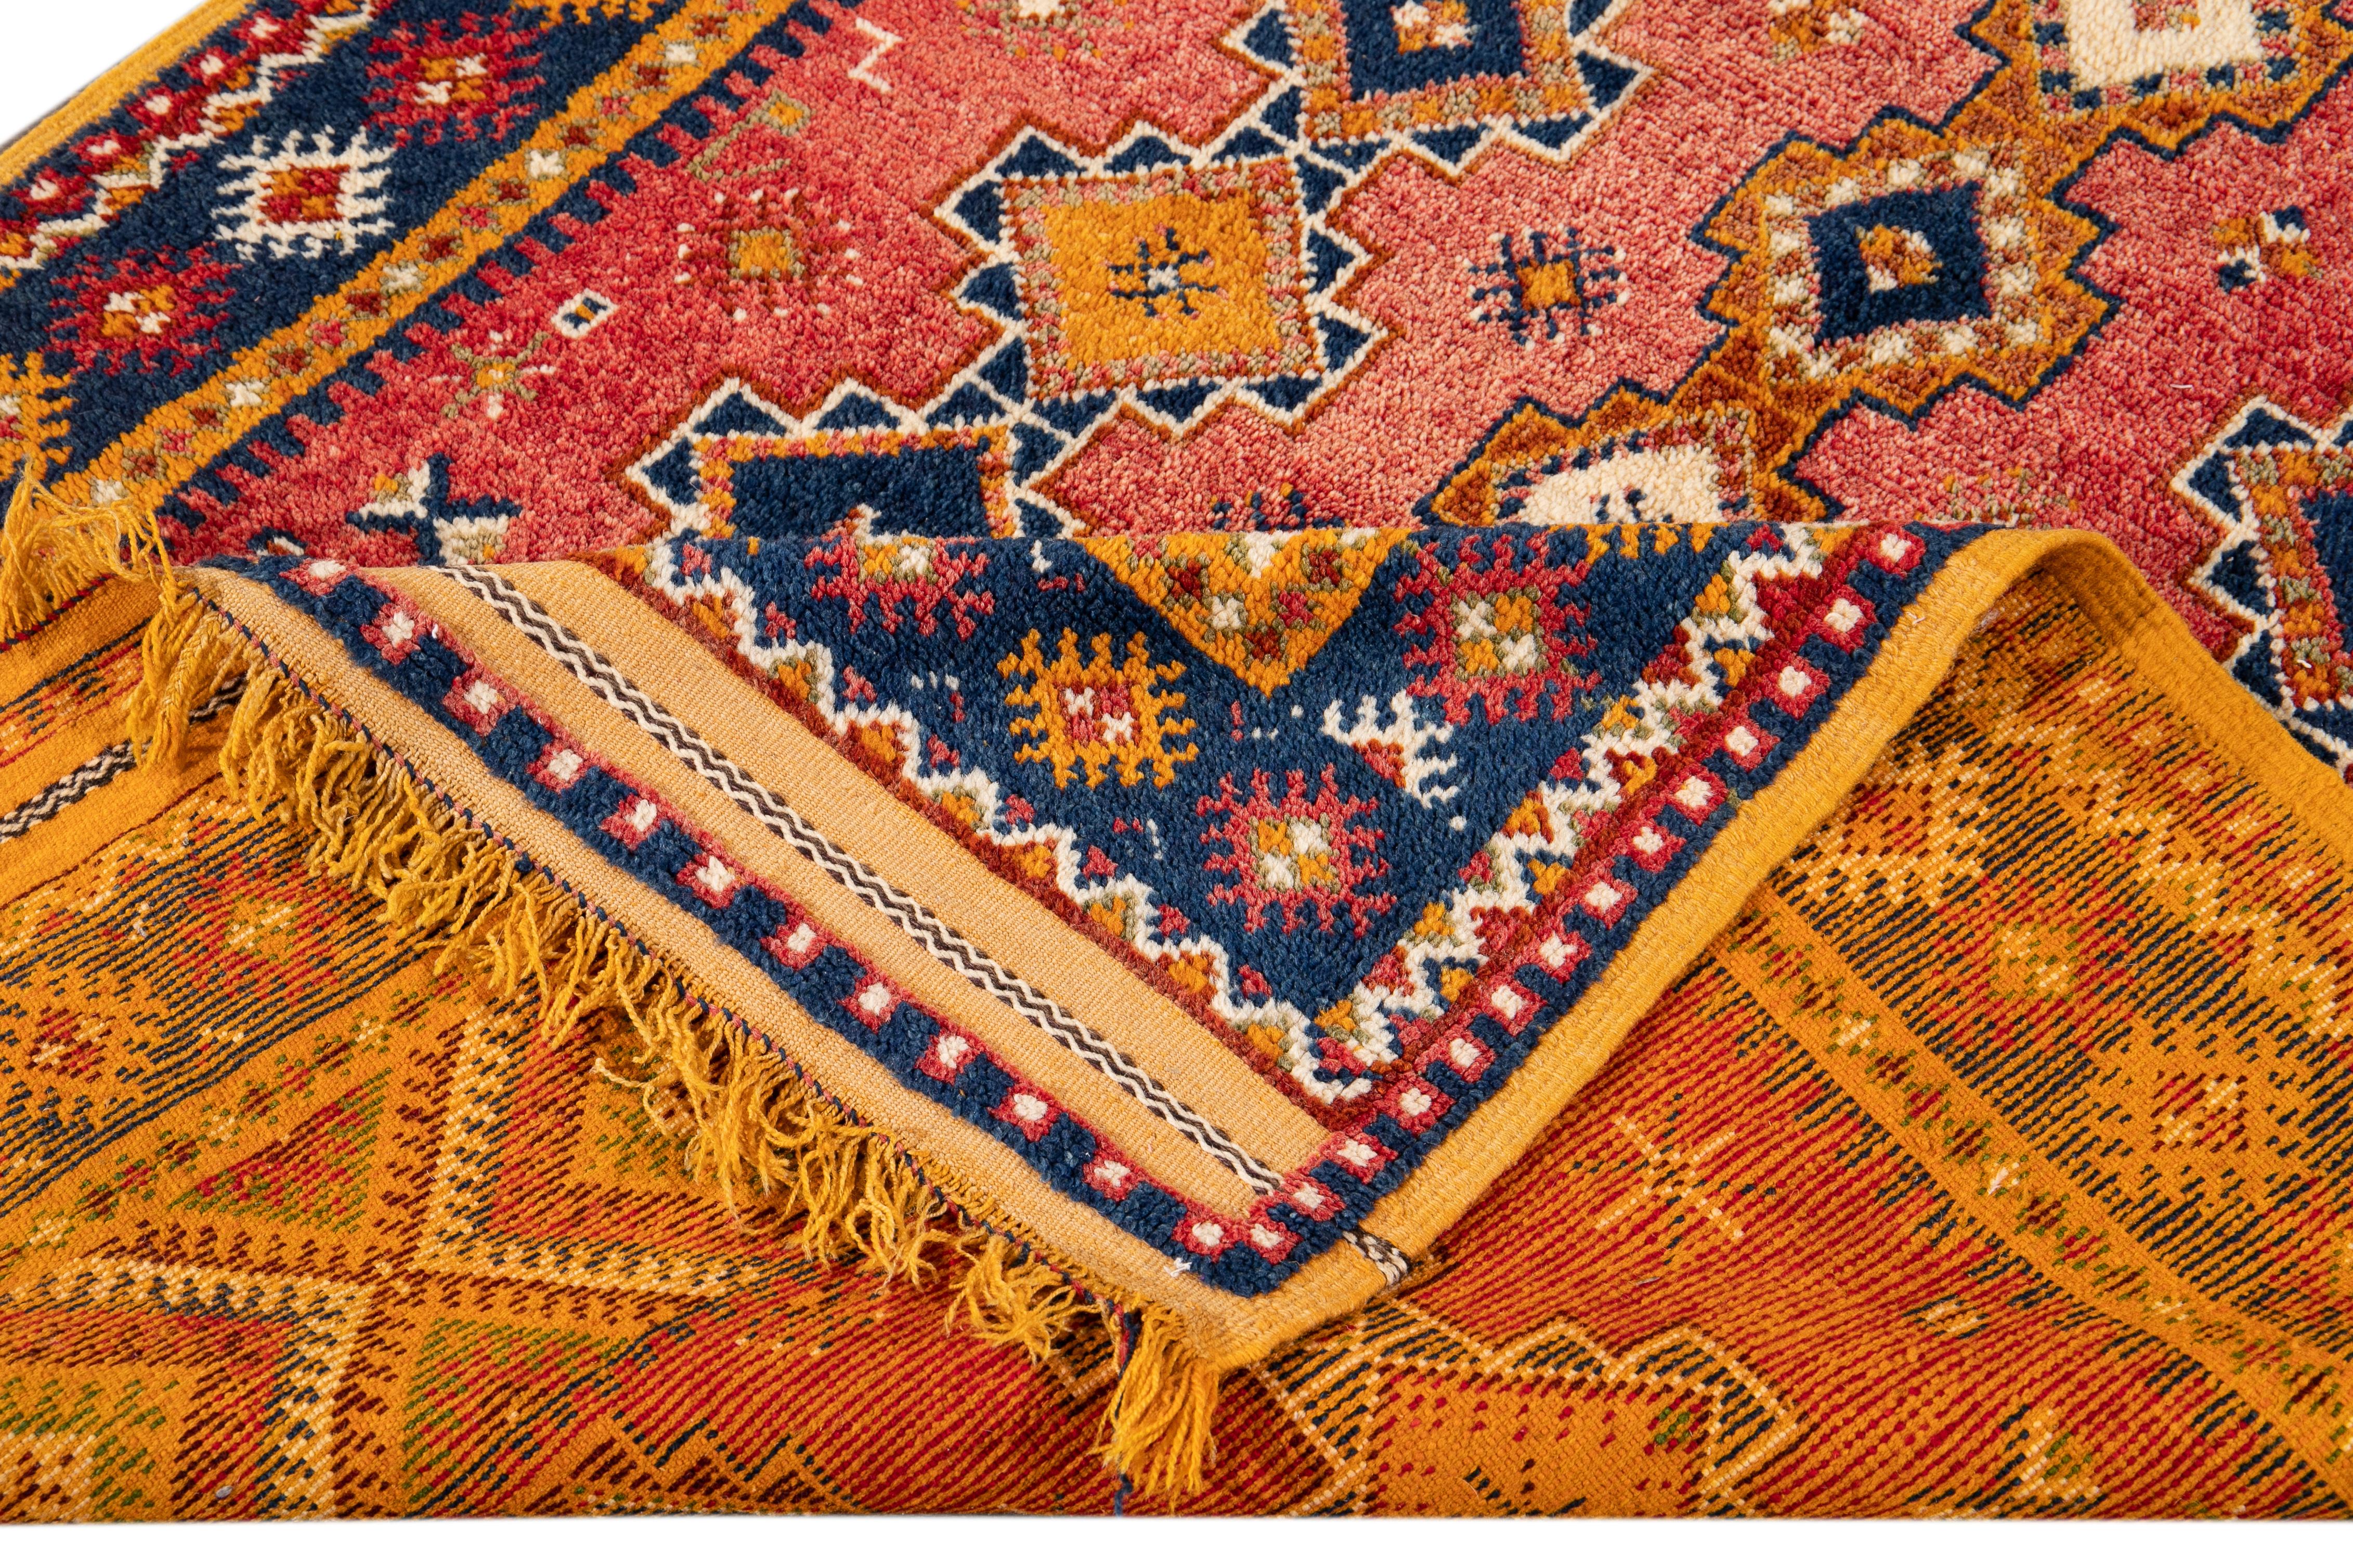 Beautiful antique Moroccan rug with a blue and yellow double border, red field, and all-over geometric design in blue and orange tones. 

This rug measures 4'8